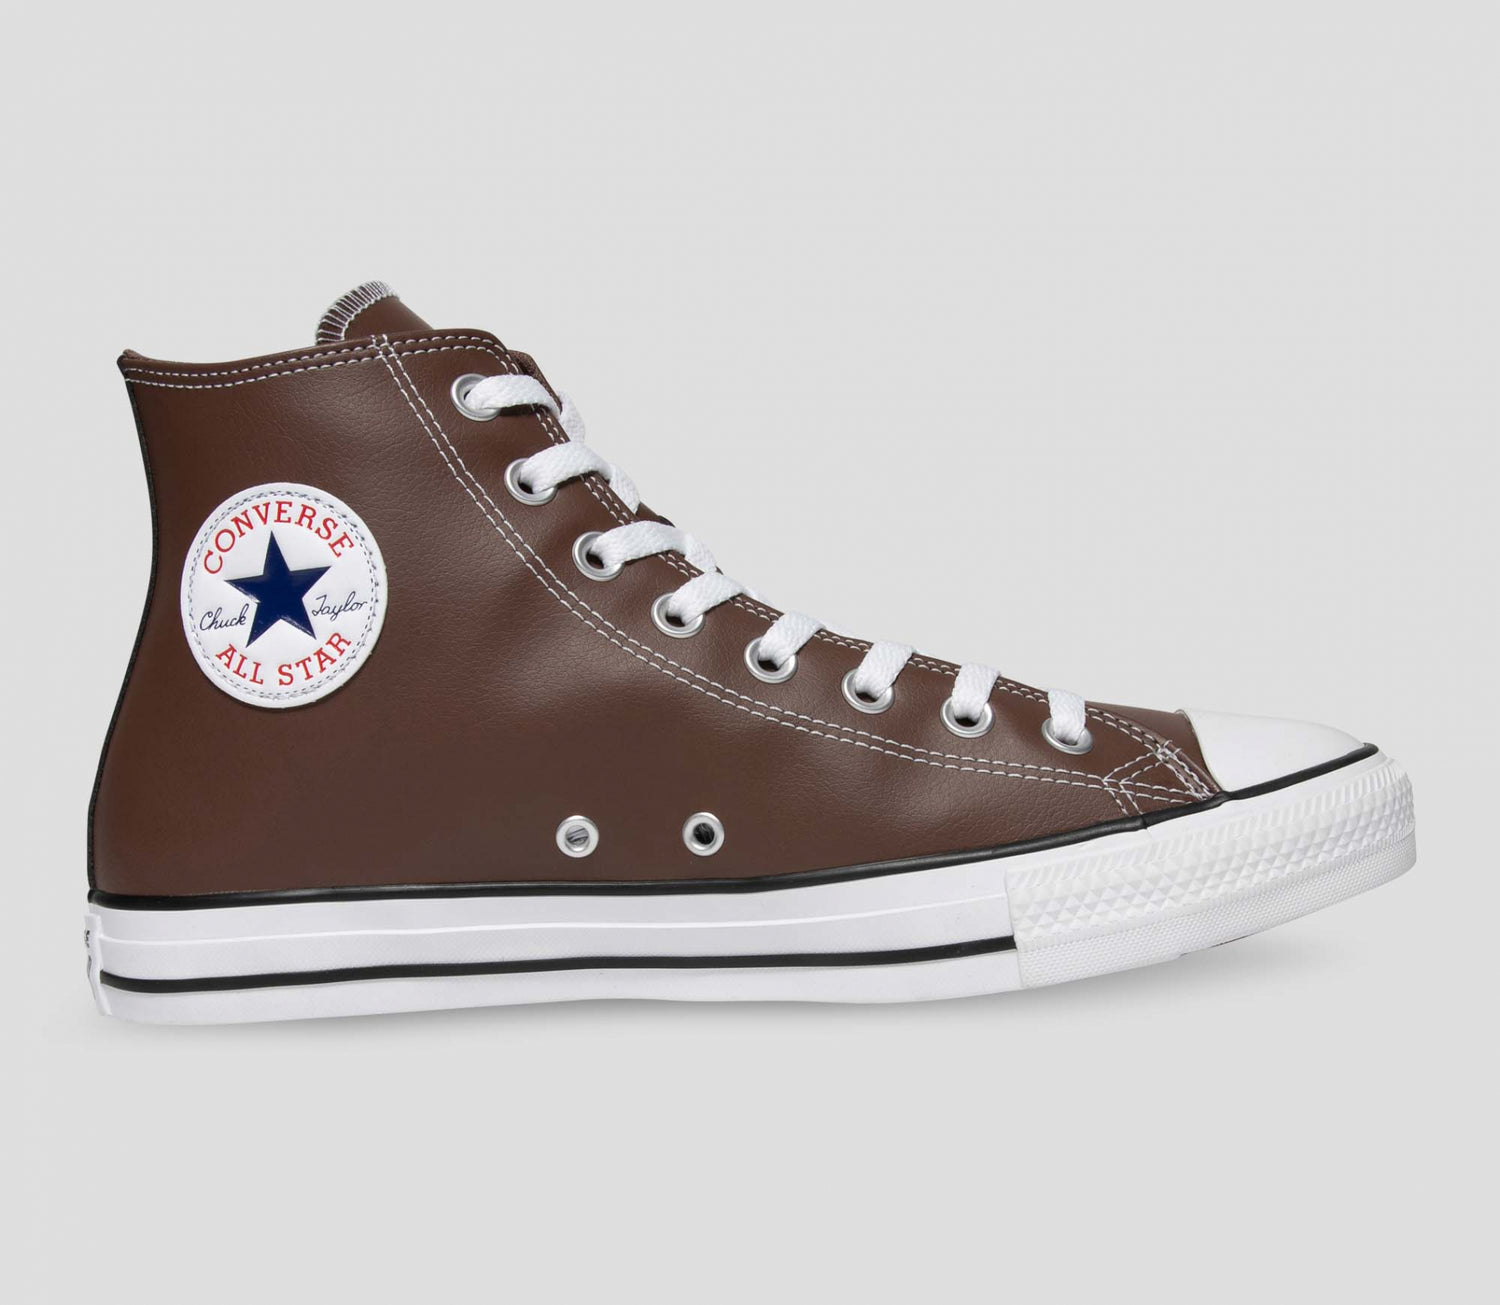 CONVERSE CHUCK TAYLOR ALL STAR FAUX LEATHER HIGH TOP - BRAZIL NUT ...